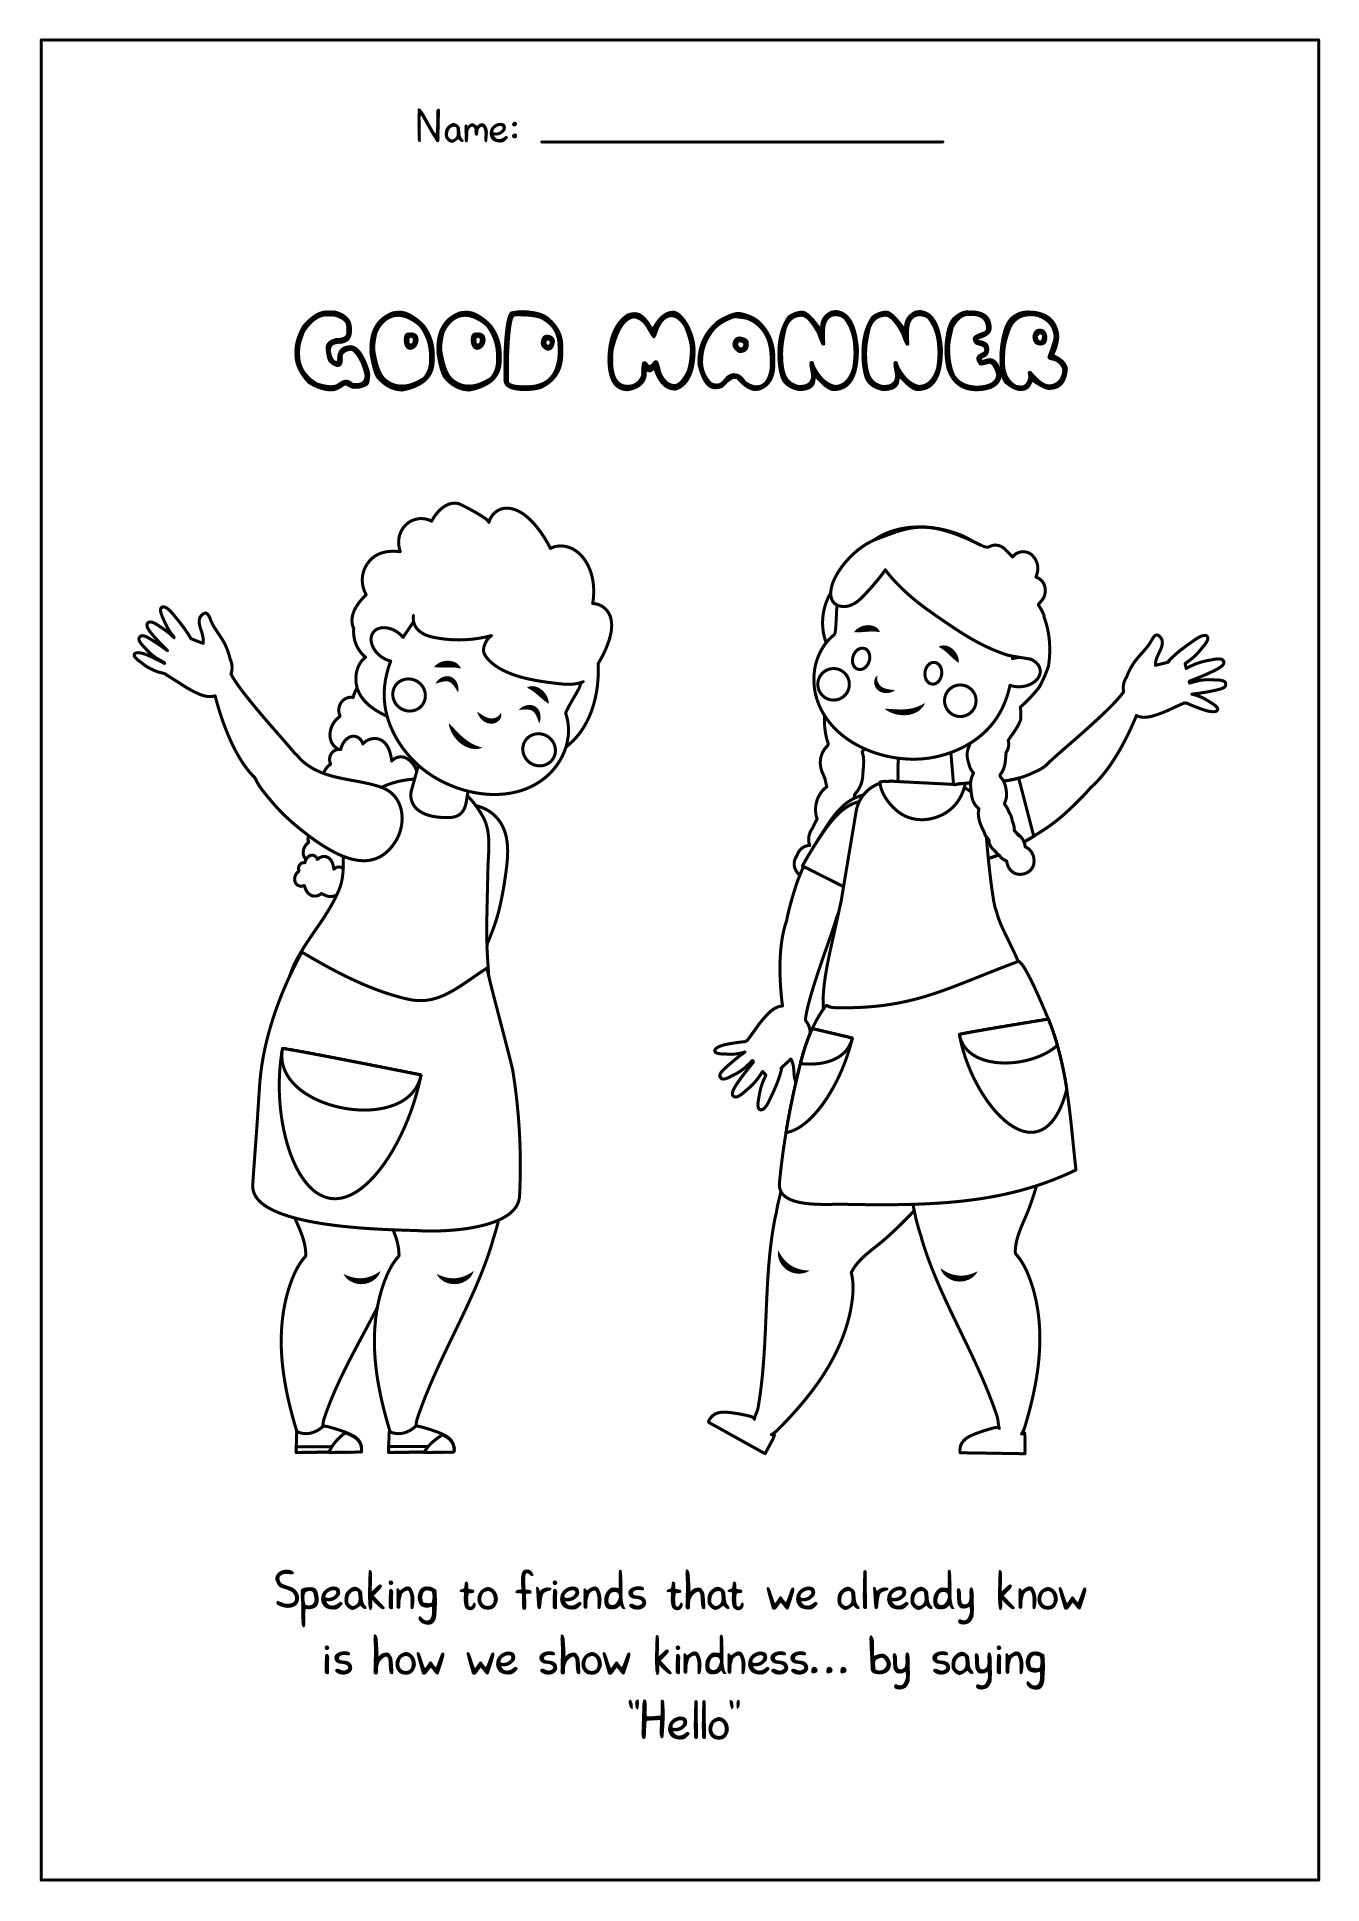 manners for children coloring pages - photo #12